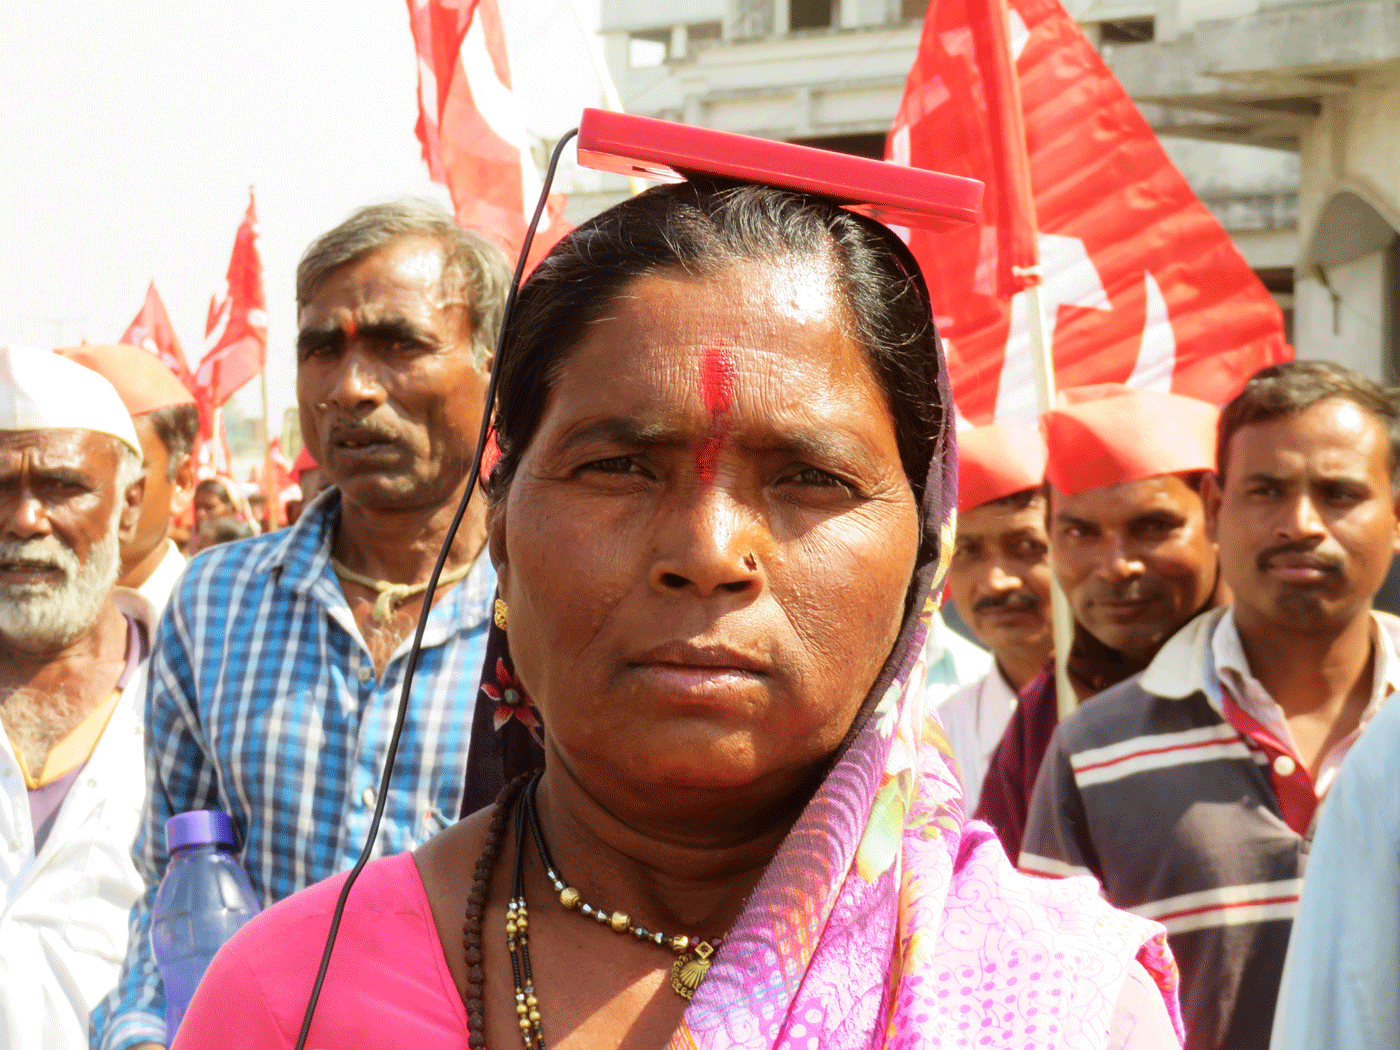 A woman during the March 